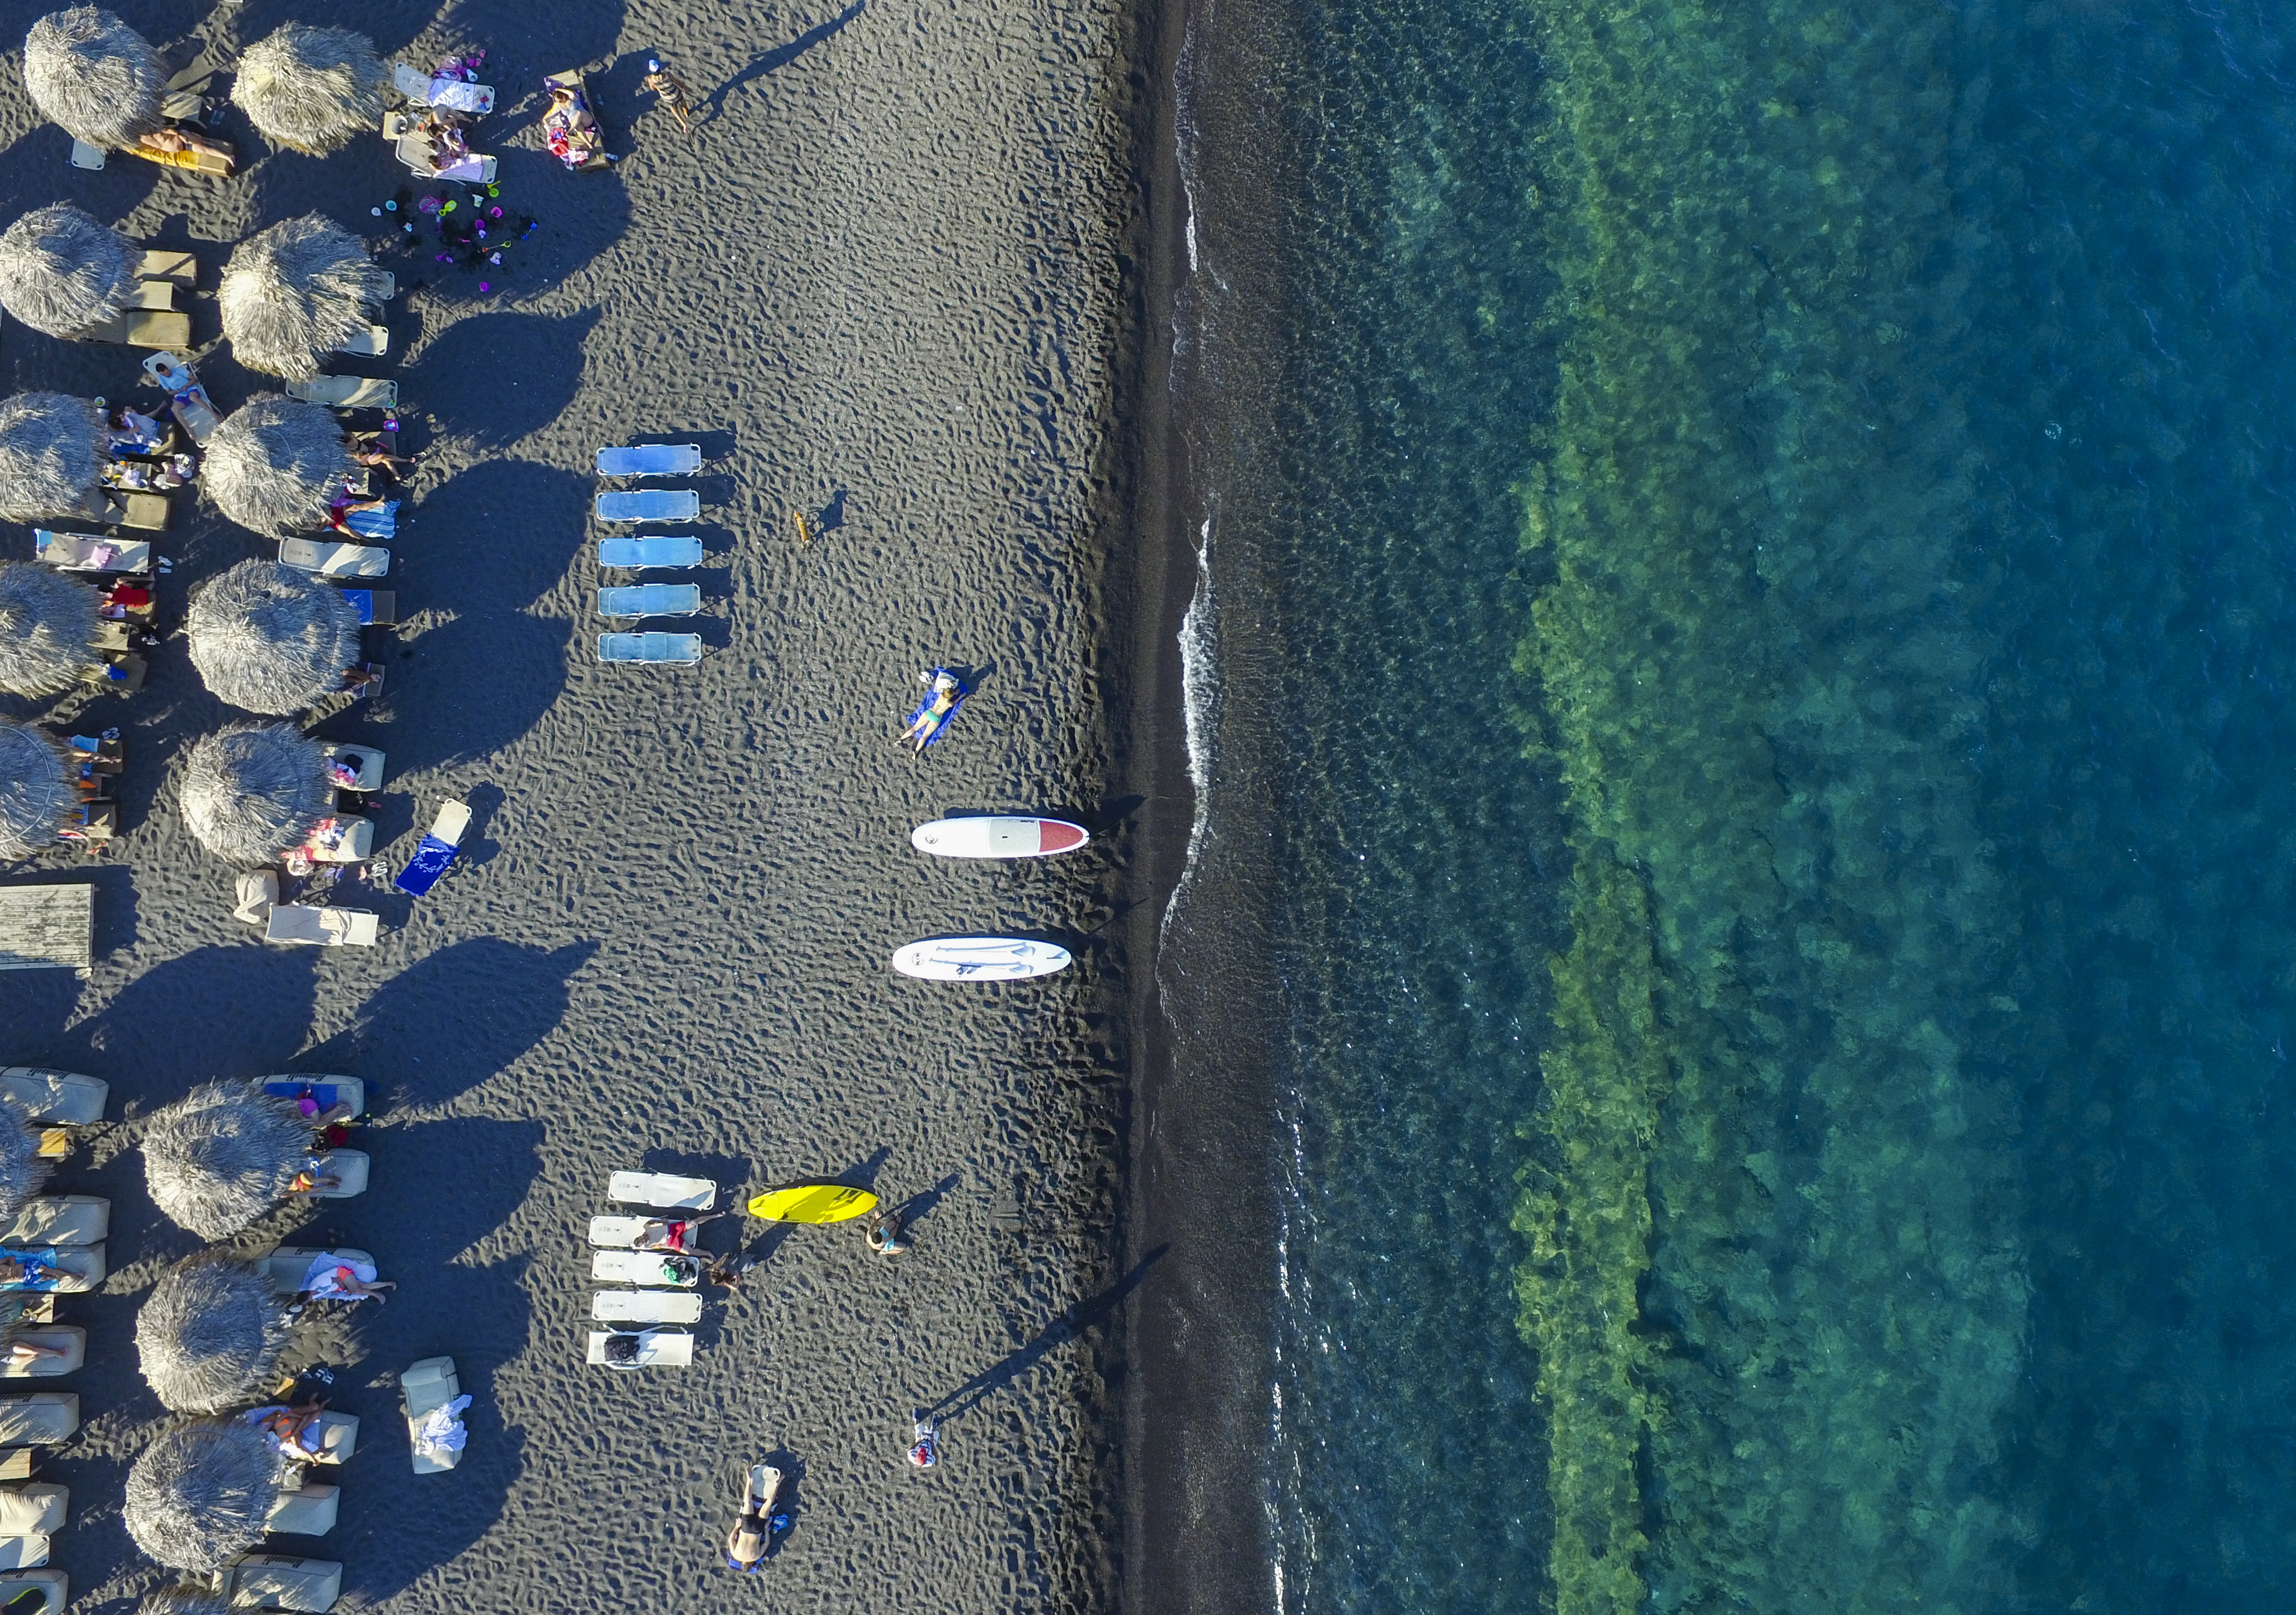 Slide 37 of 39: SANTORINI, GREECE - JUNE 30: Aerial view of Perissa beach on June 30, 2015 in Santorini, Greece. Perissa is a village on the island of Santorini and located 13 km to the southeast of Fira. (Photo by Athanasios Gioumpasis/Getty Images)